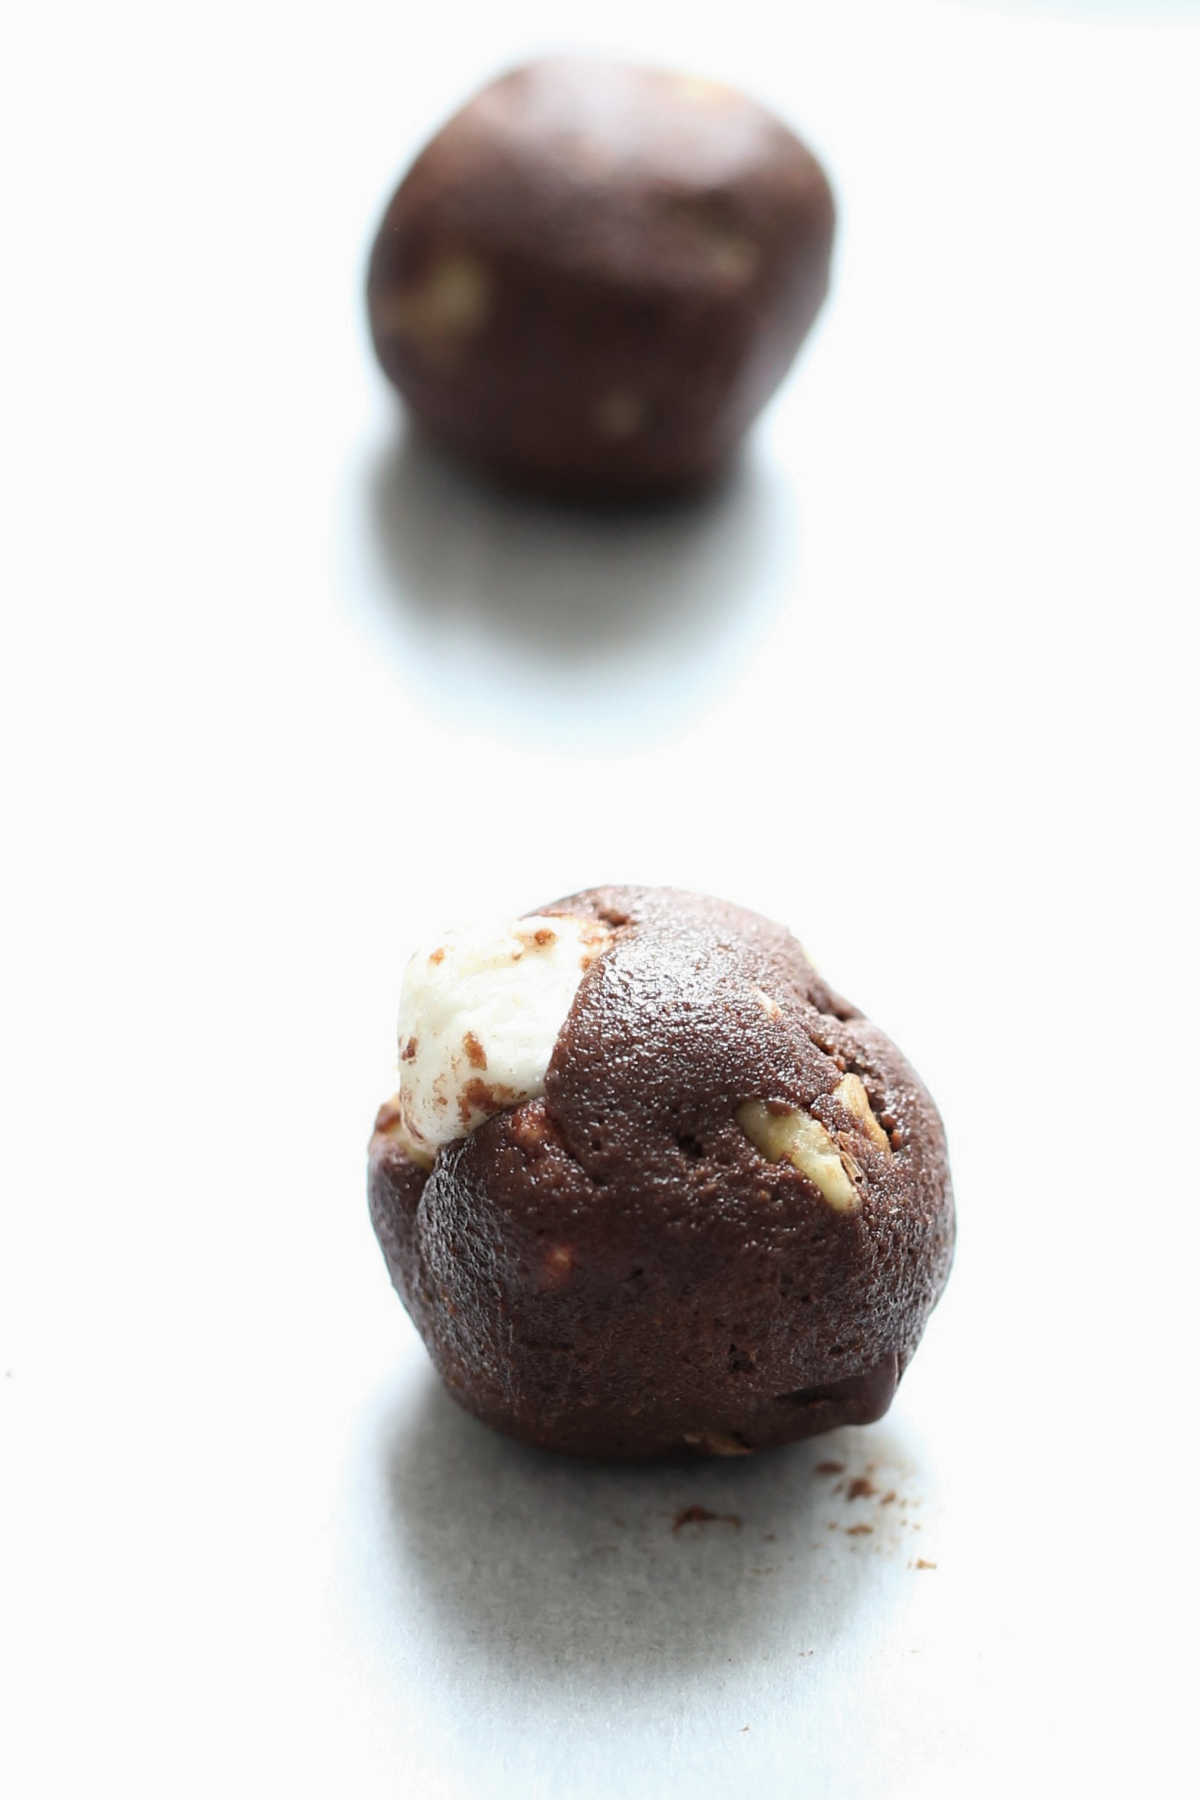 ball of chocolate rocky road cookie dough on parchment paper